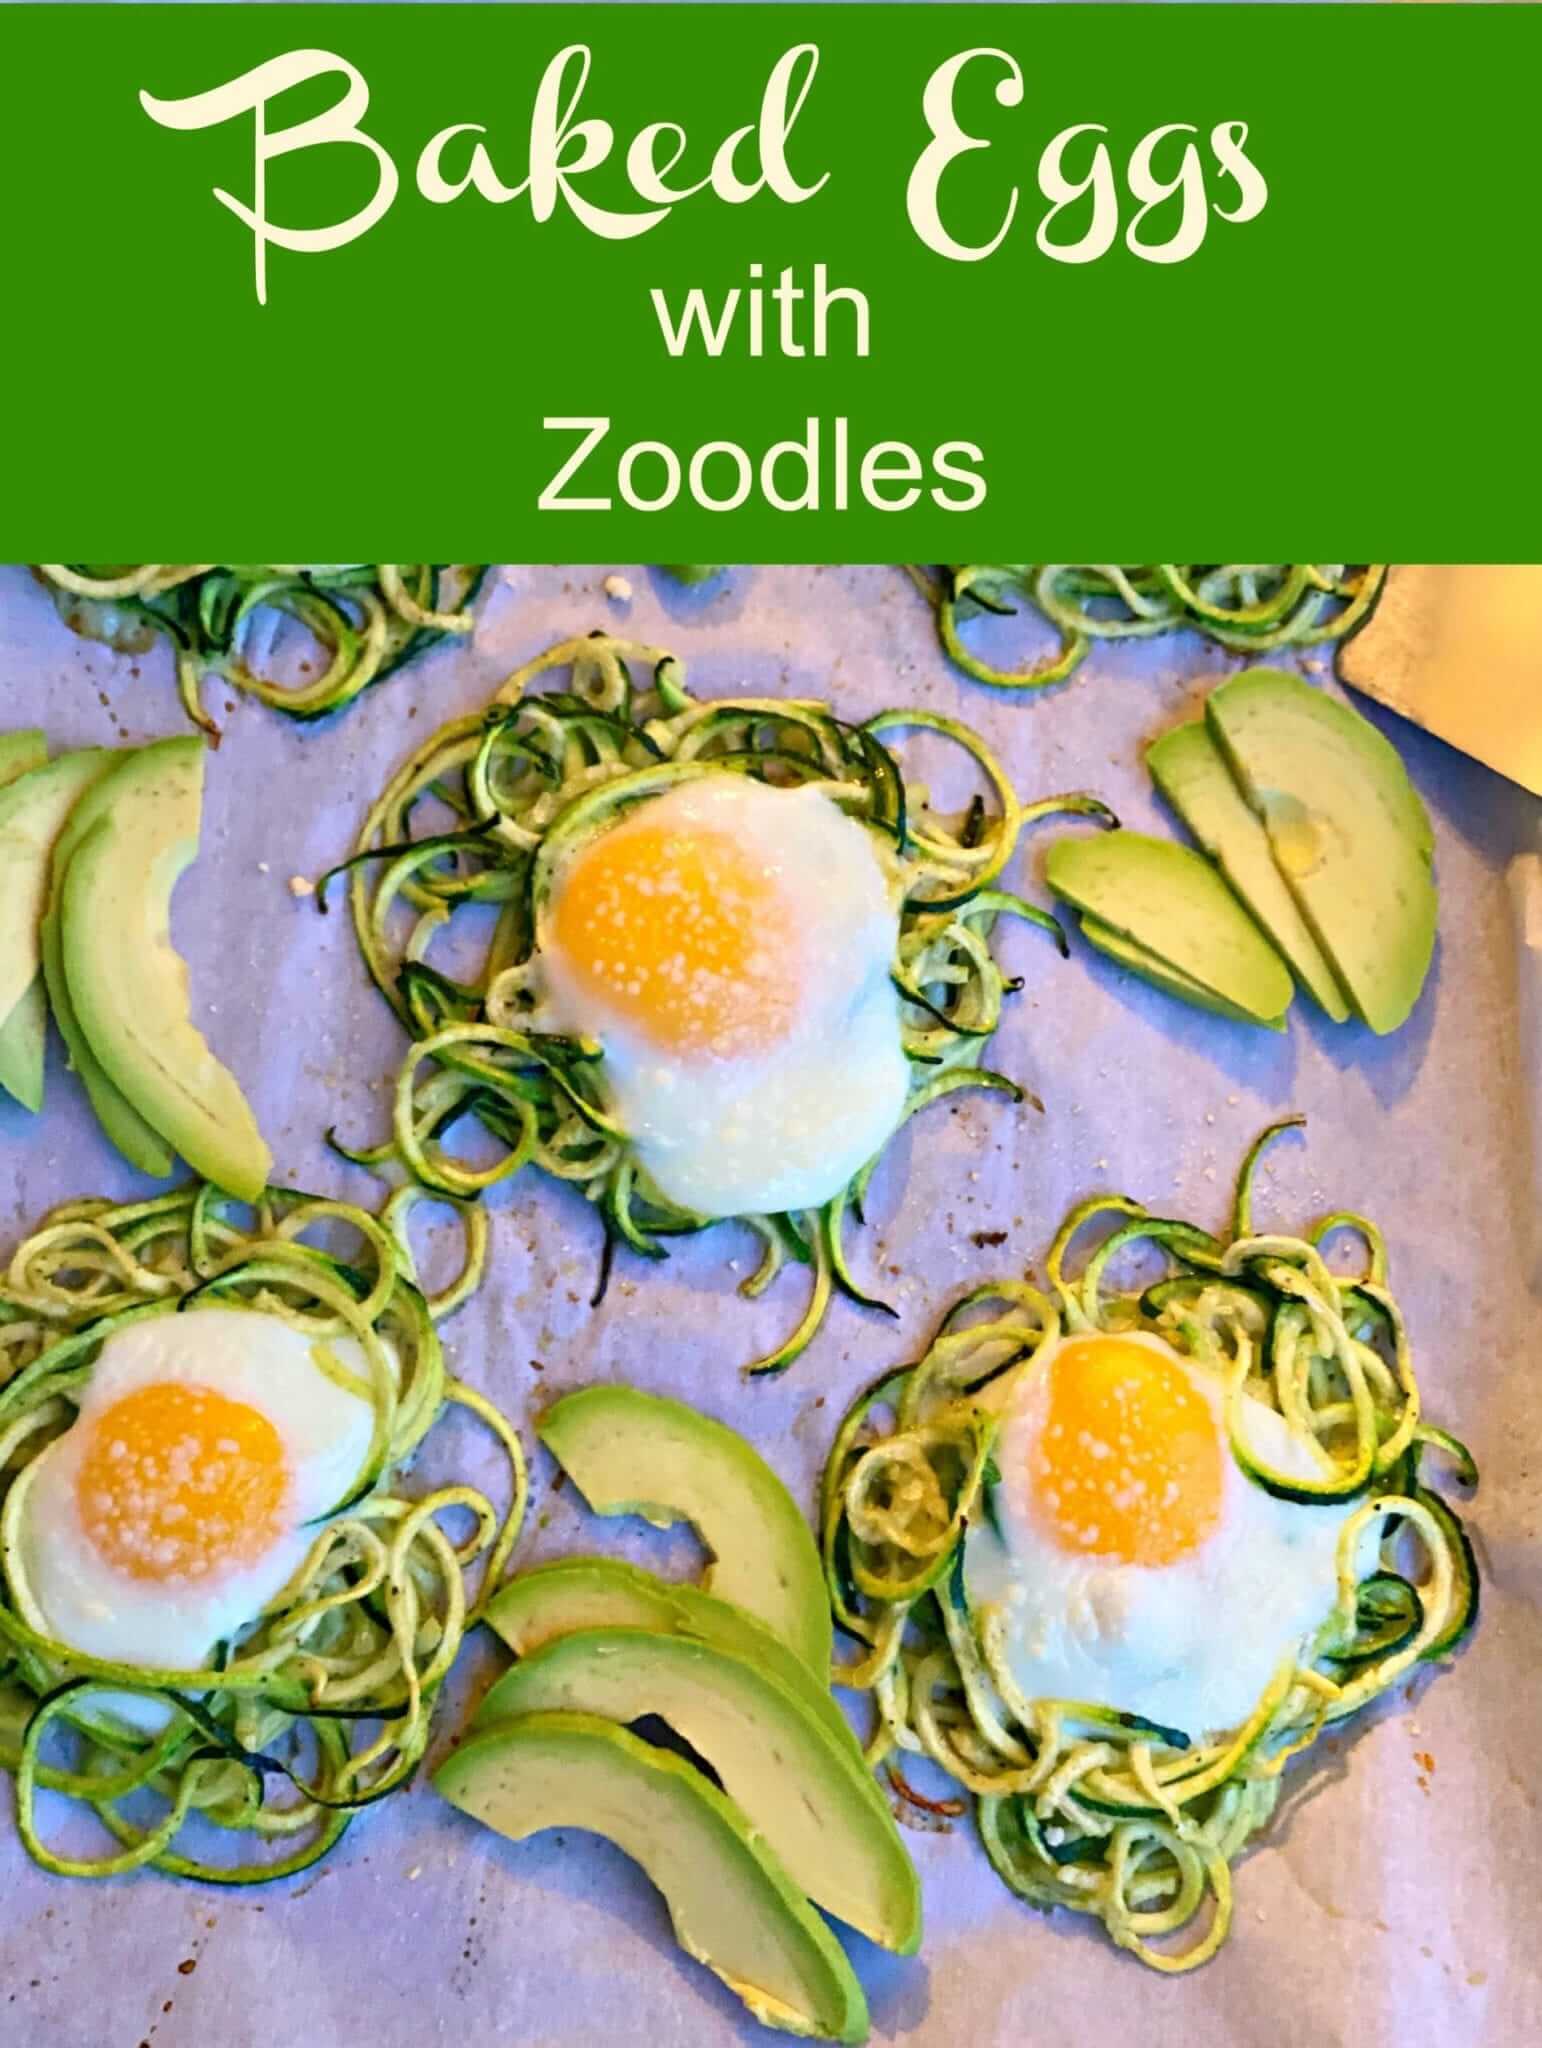 lou lou girls baked eggs with zoodles